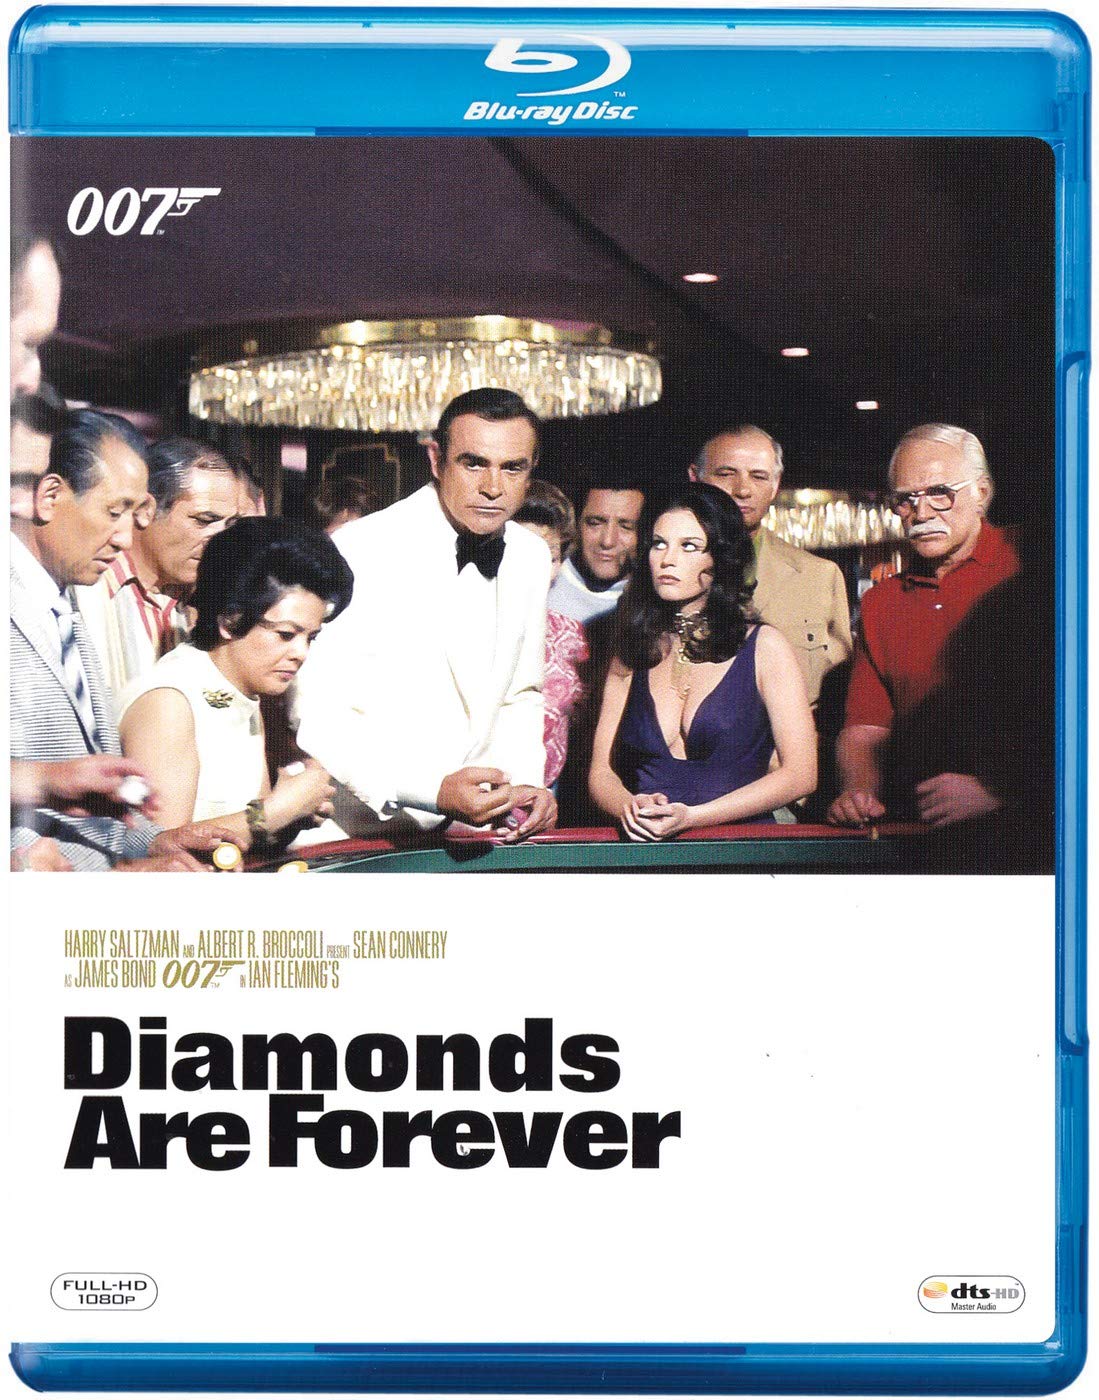 007-diamonds-are-forever-sean-connery-as-james-bond-movie-purchase